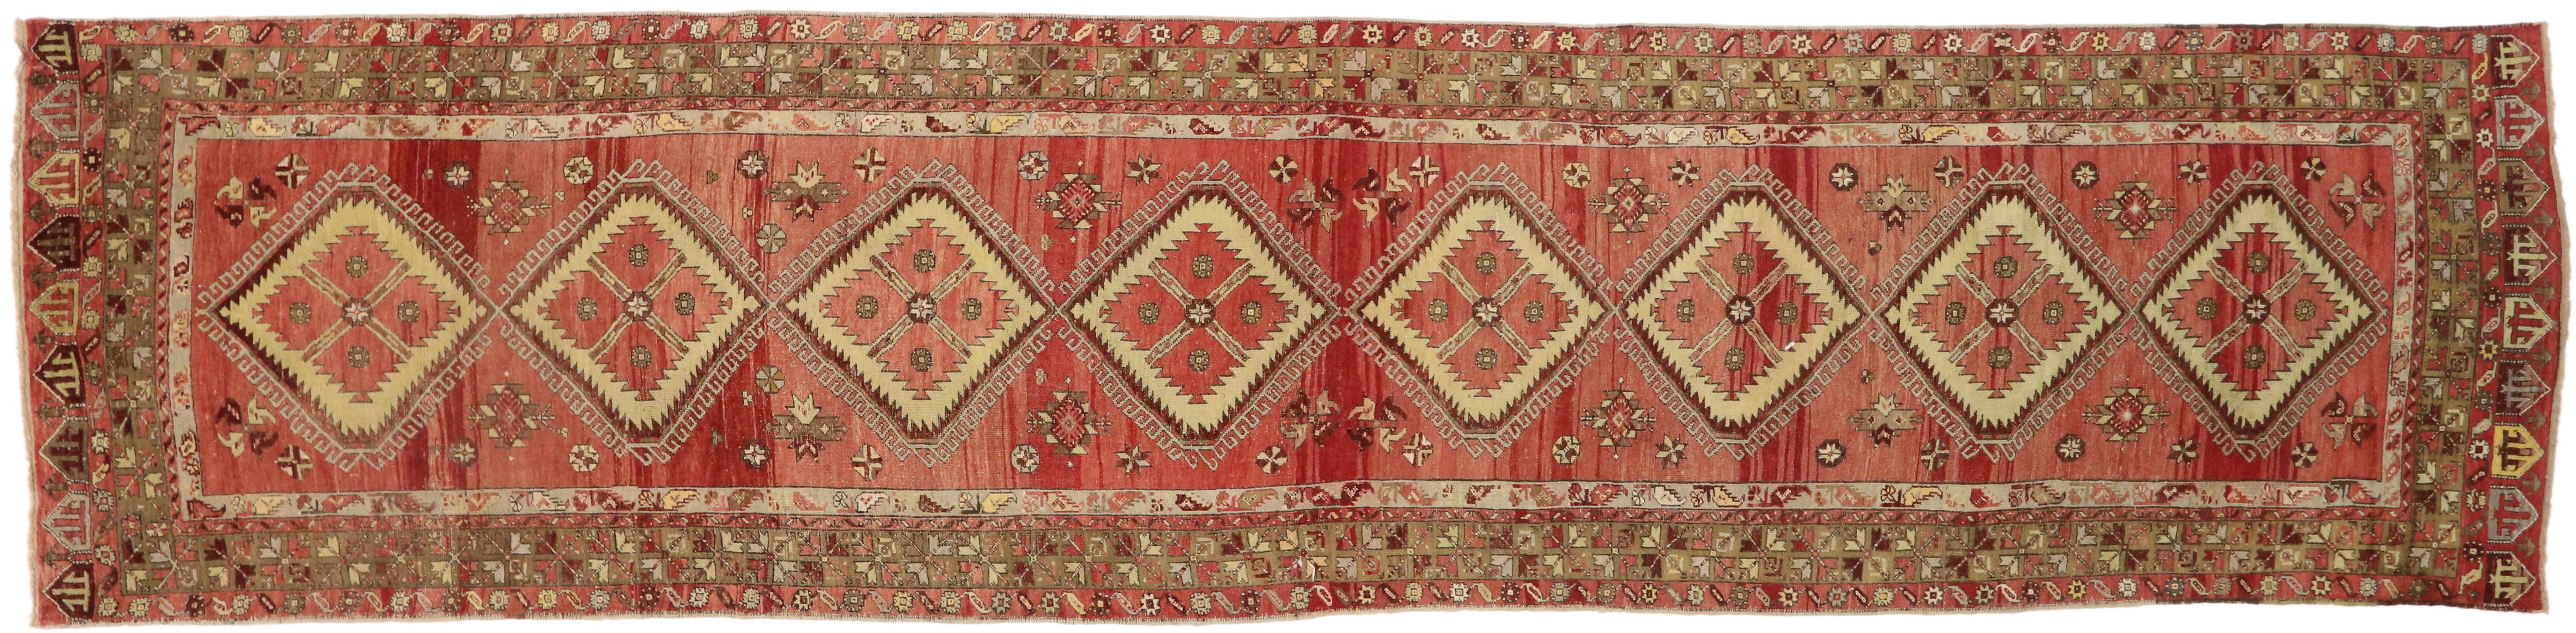 Vintage​ Turkish Oushak Long Runner with Mid-Century Modern Tribal Style  For Sale 2